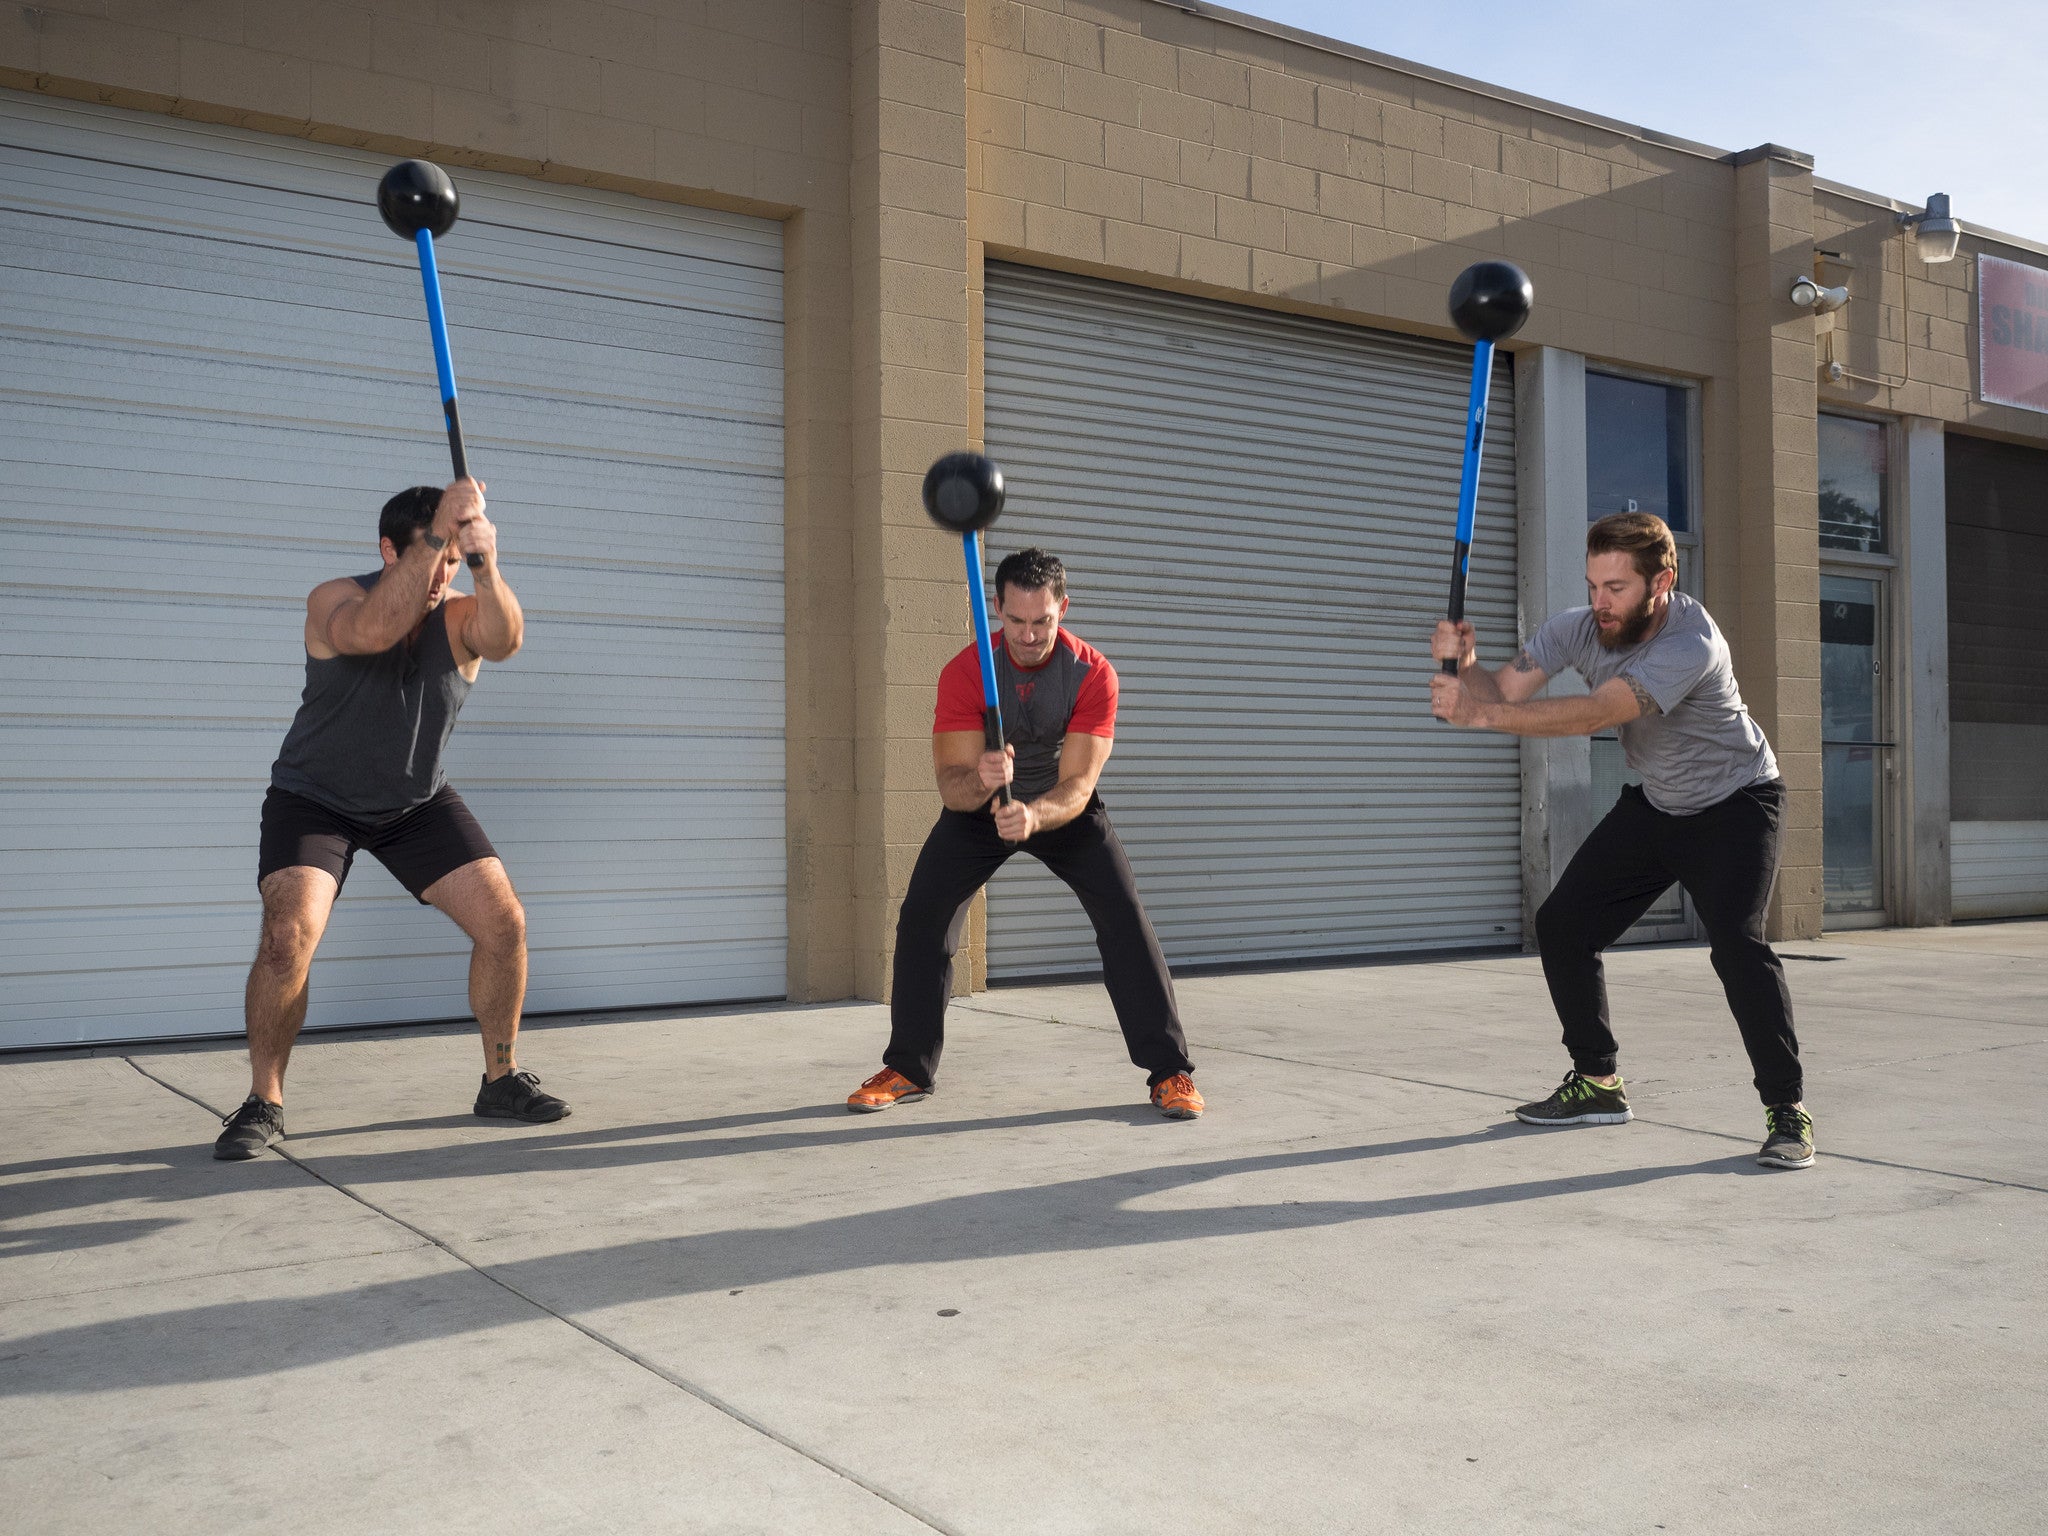 Simple Sledge Hammer Workout Benefits for Gym